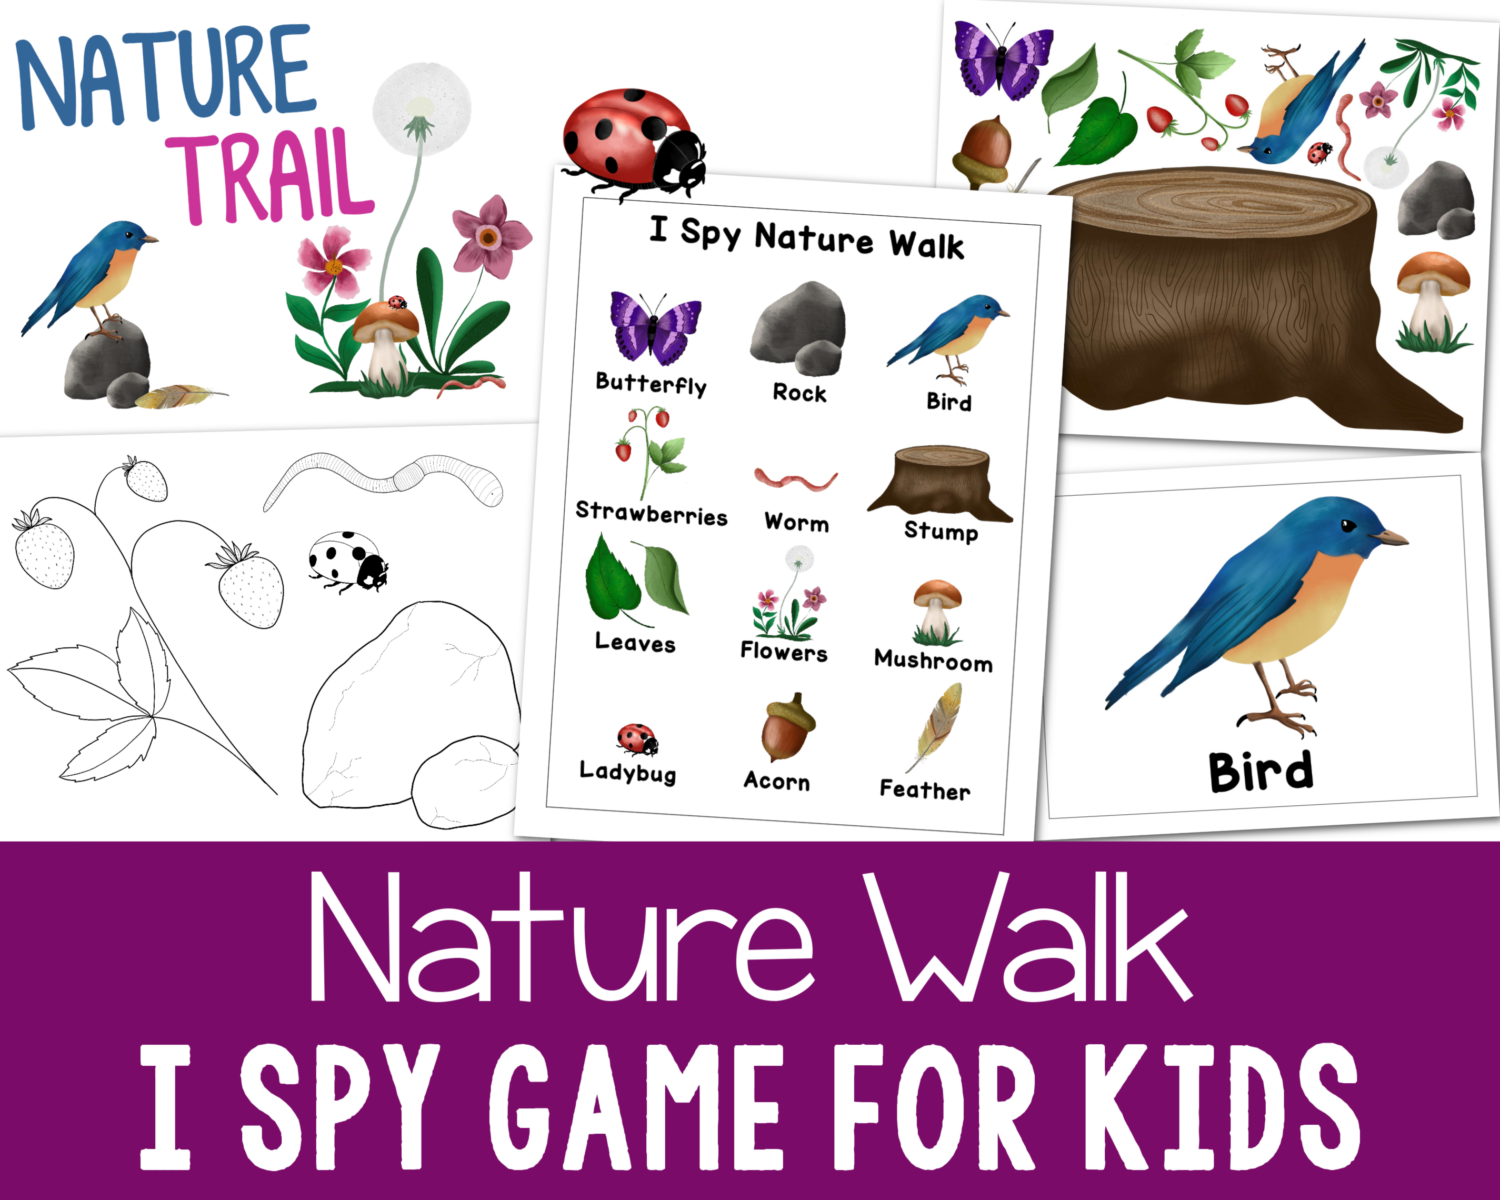 Nature Walk I Spy Game for kids fun kids activity indoors or outdoors with printable things to spot and a checklist!